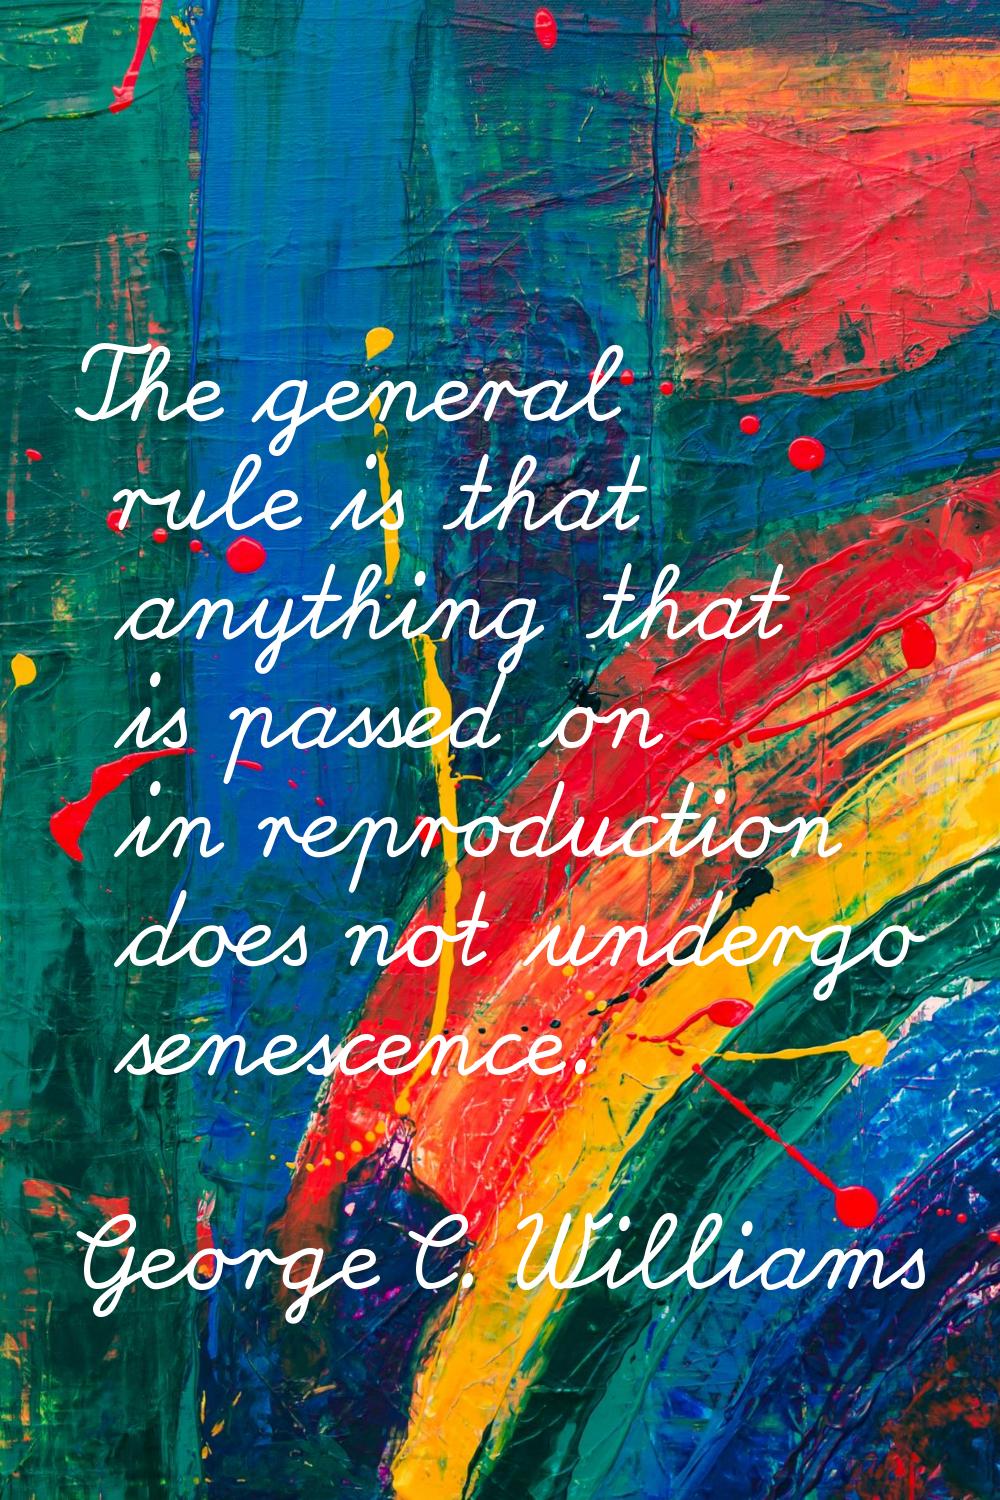 The general rule is that anything that is passed on in reproduction does not undergo senescence.